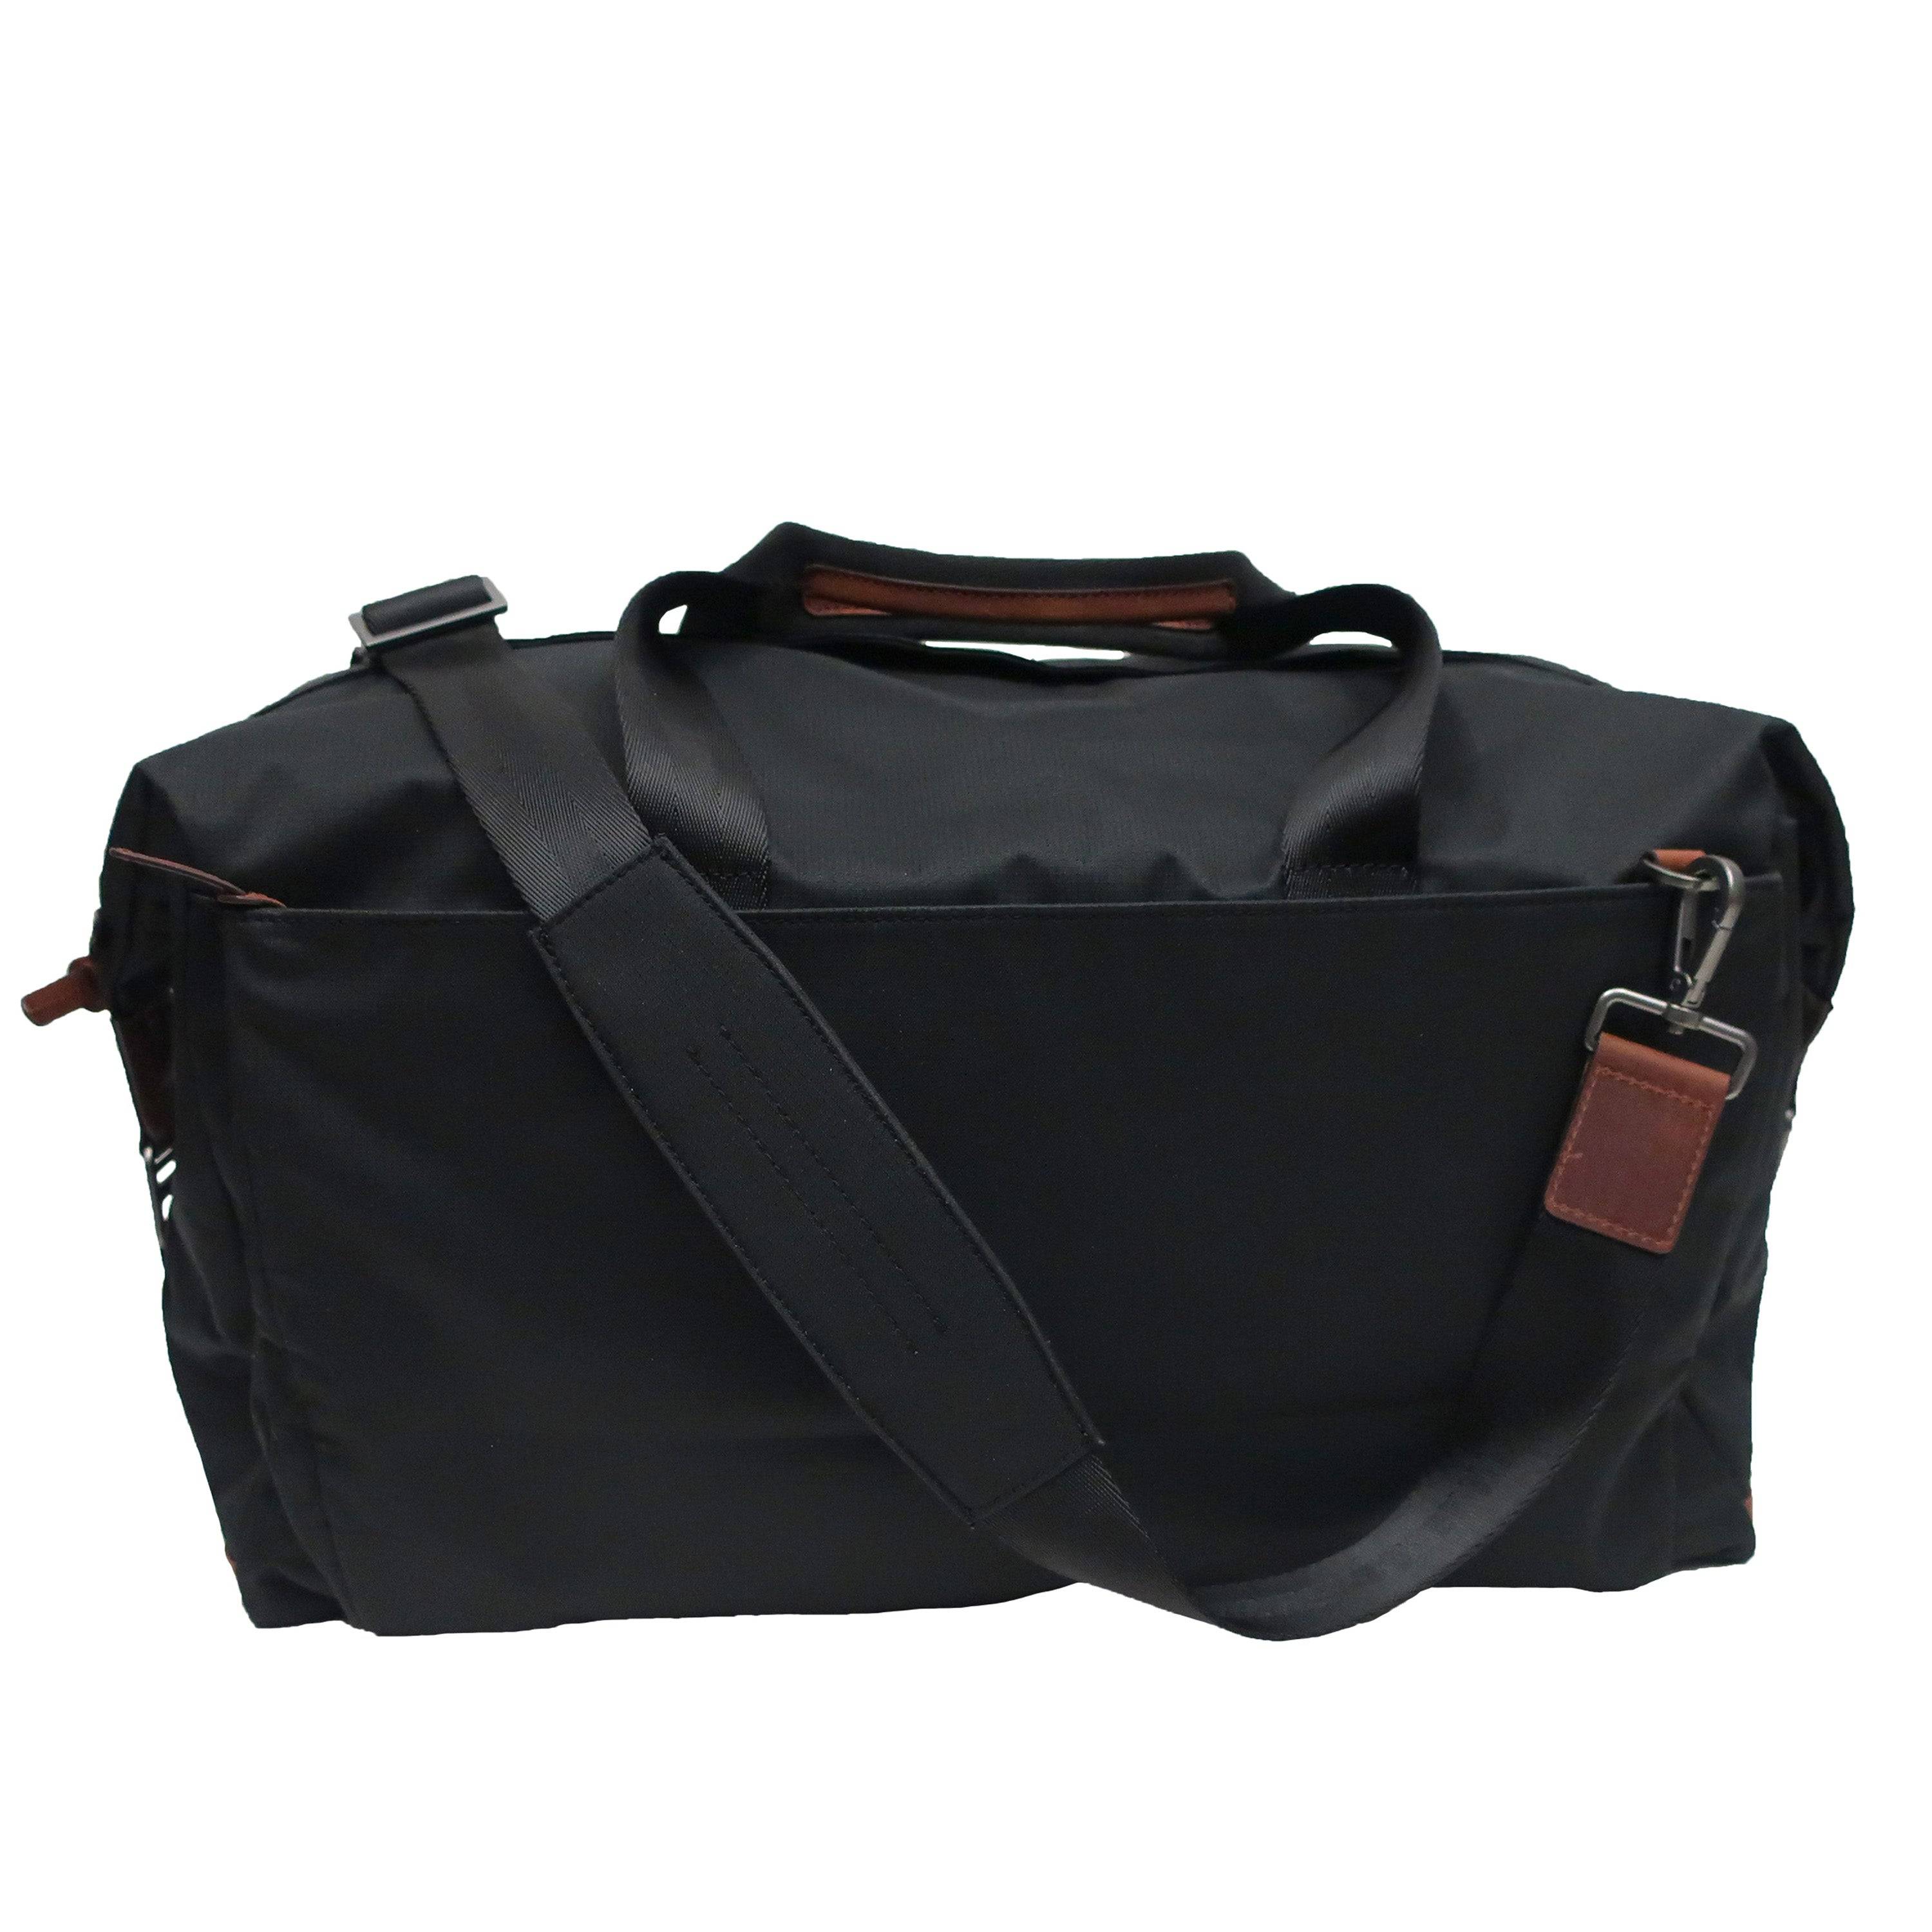 Recycled Poly Oversized Travel Duffel Bag with Adjustable Shoulder Strap